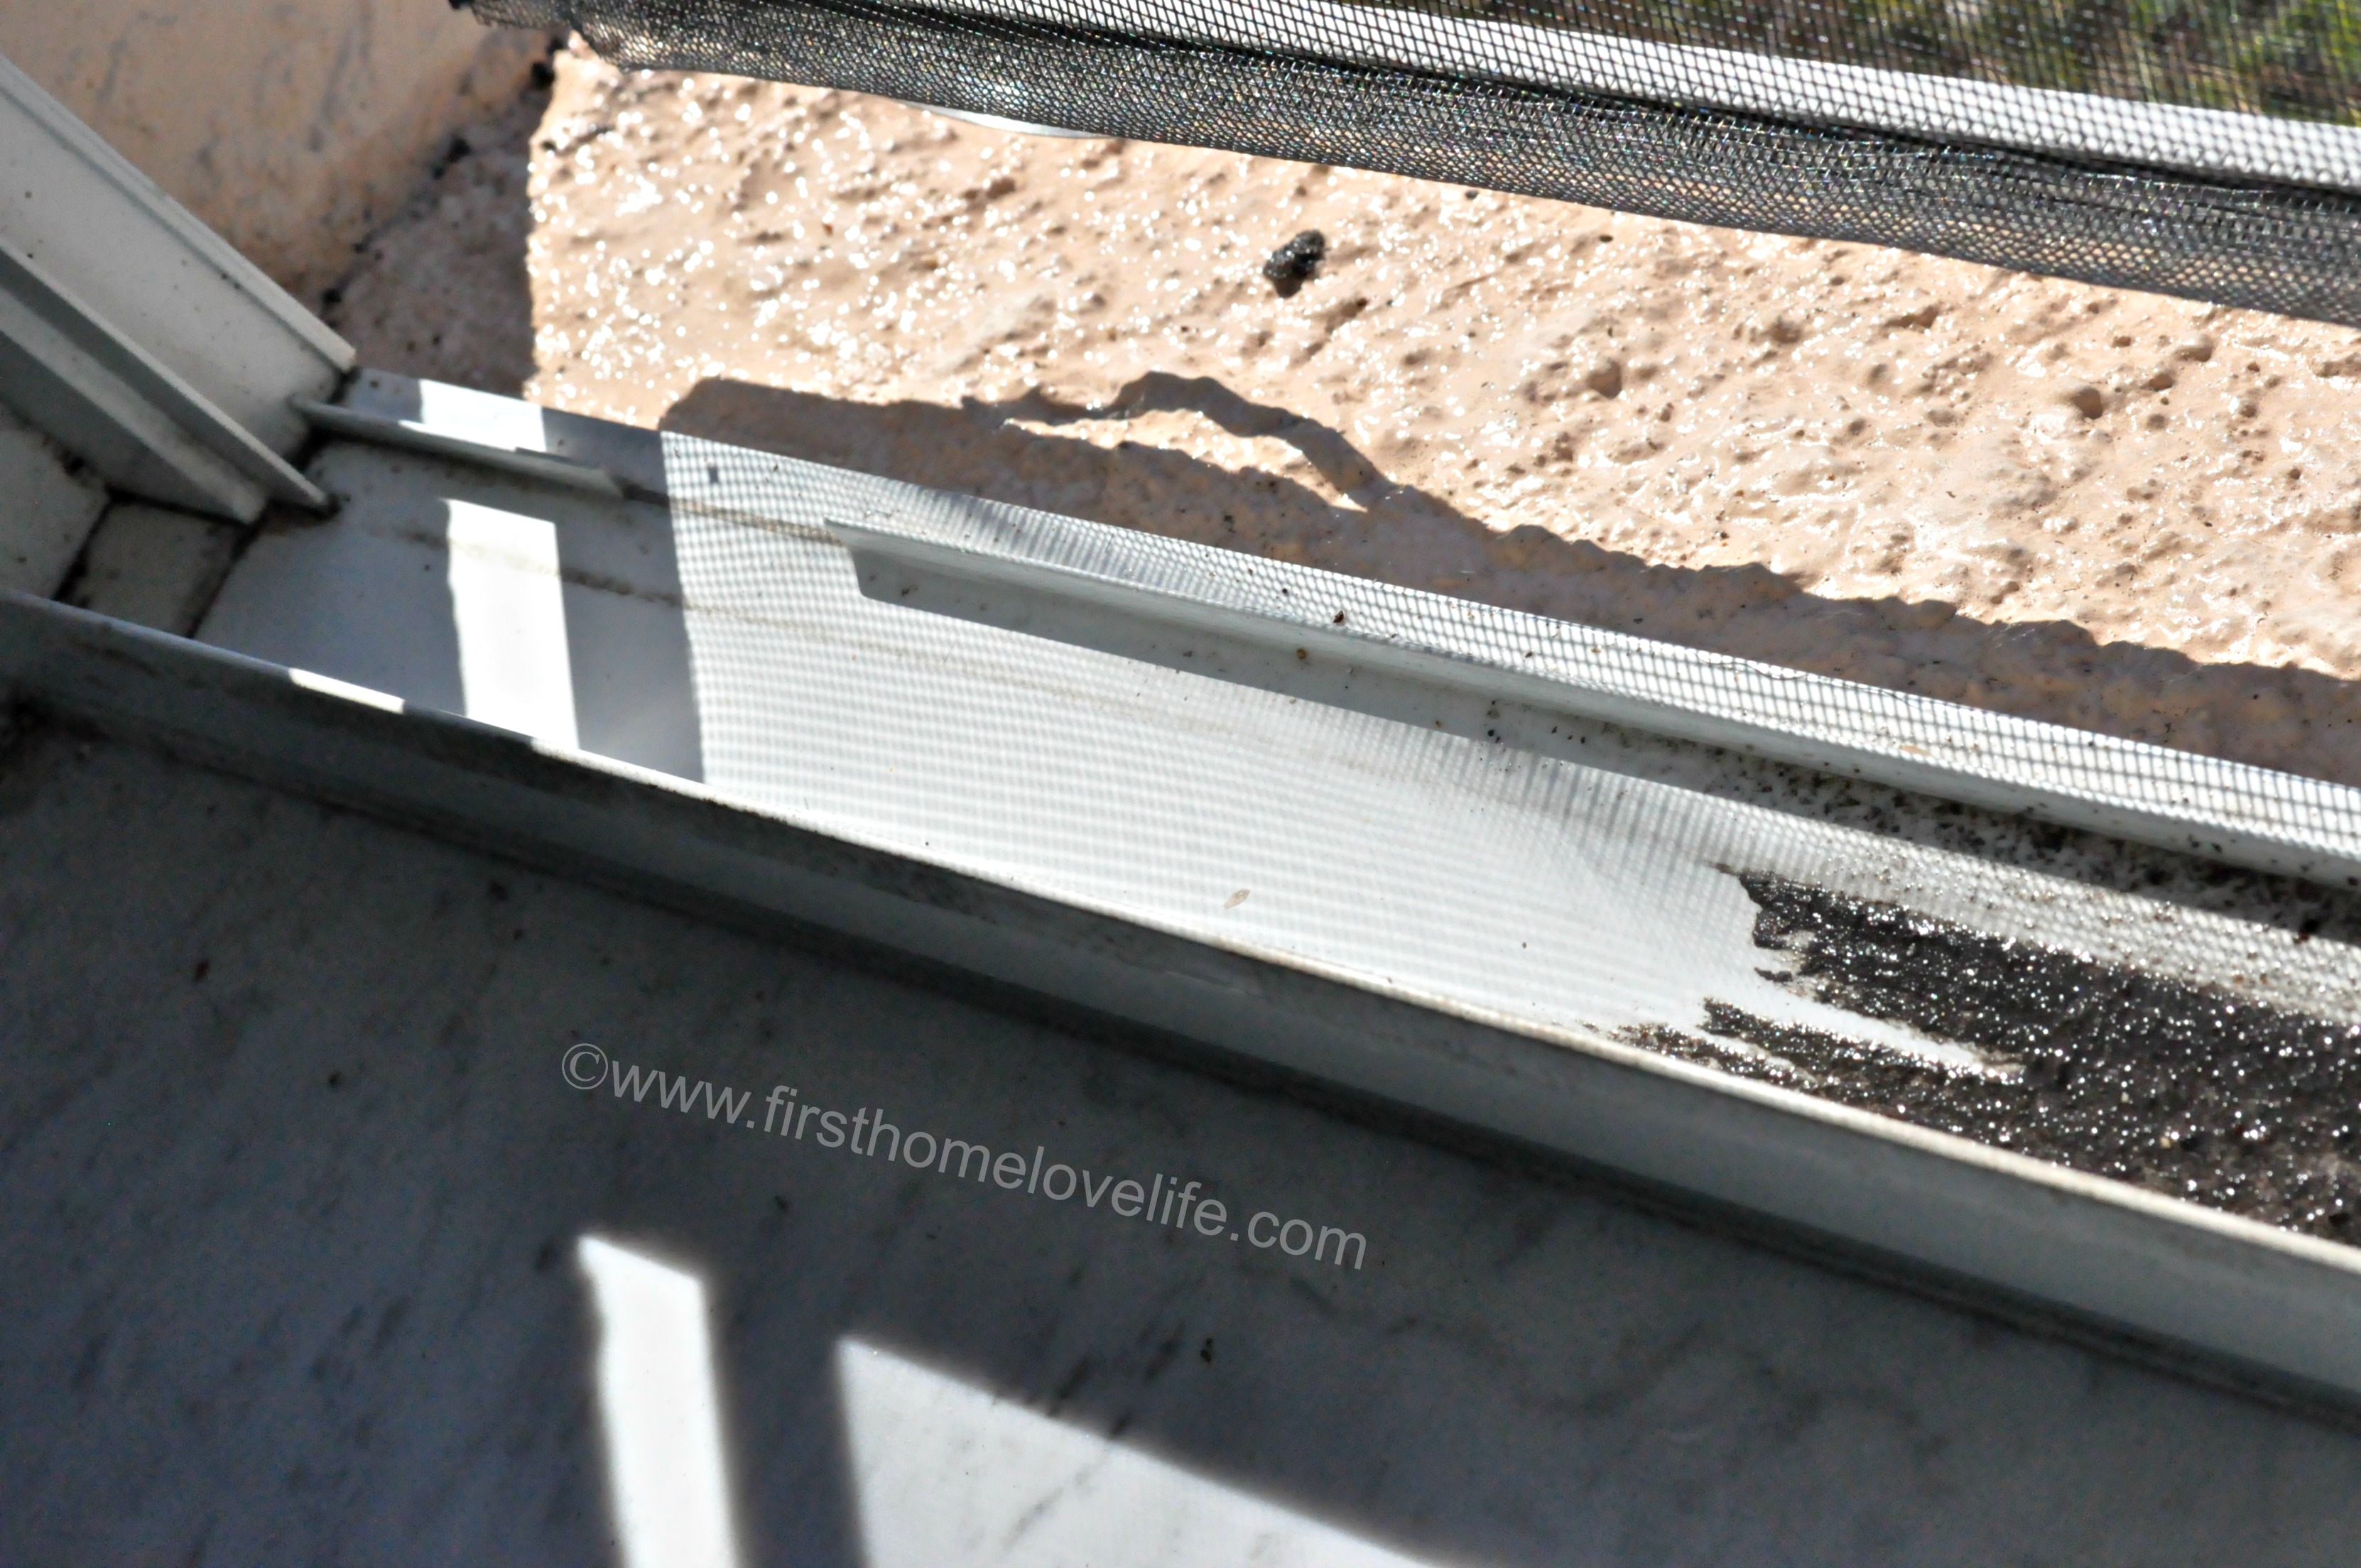 How to Clean Your Window Sills & Tracks?